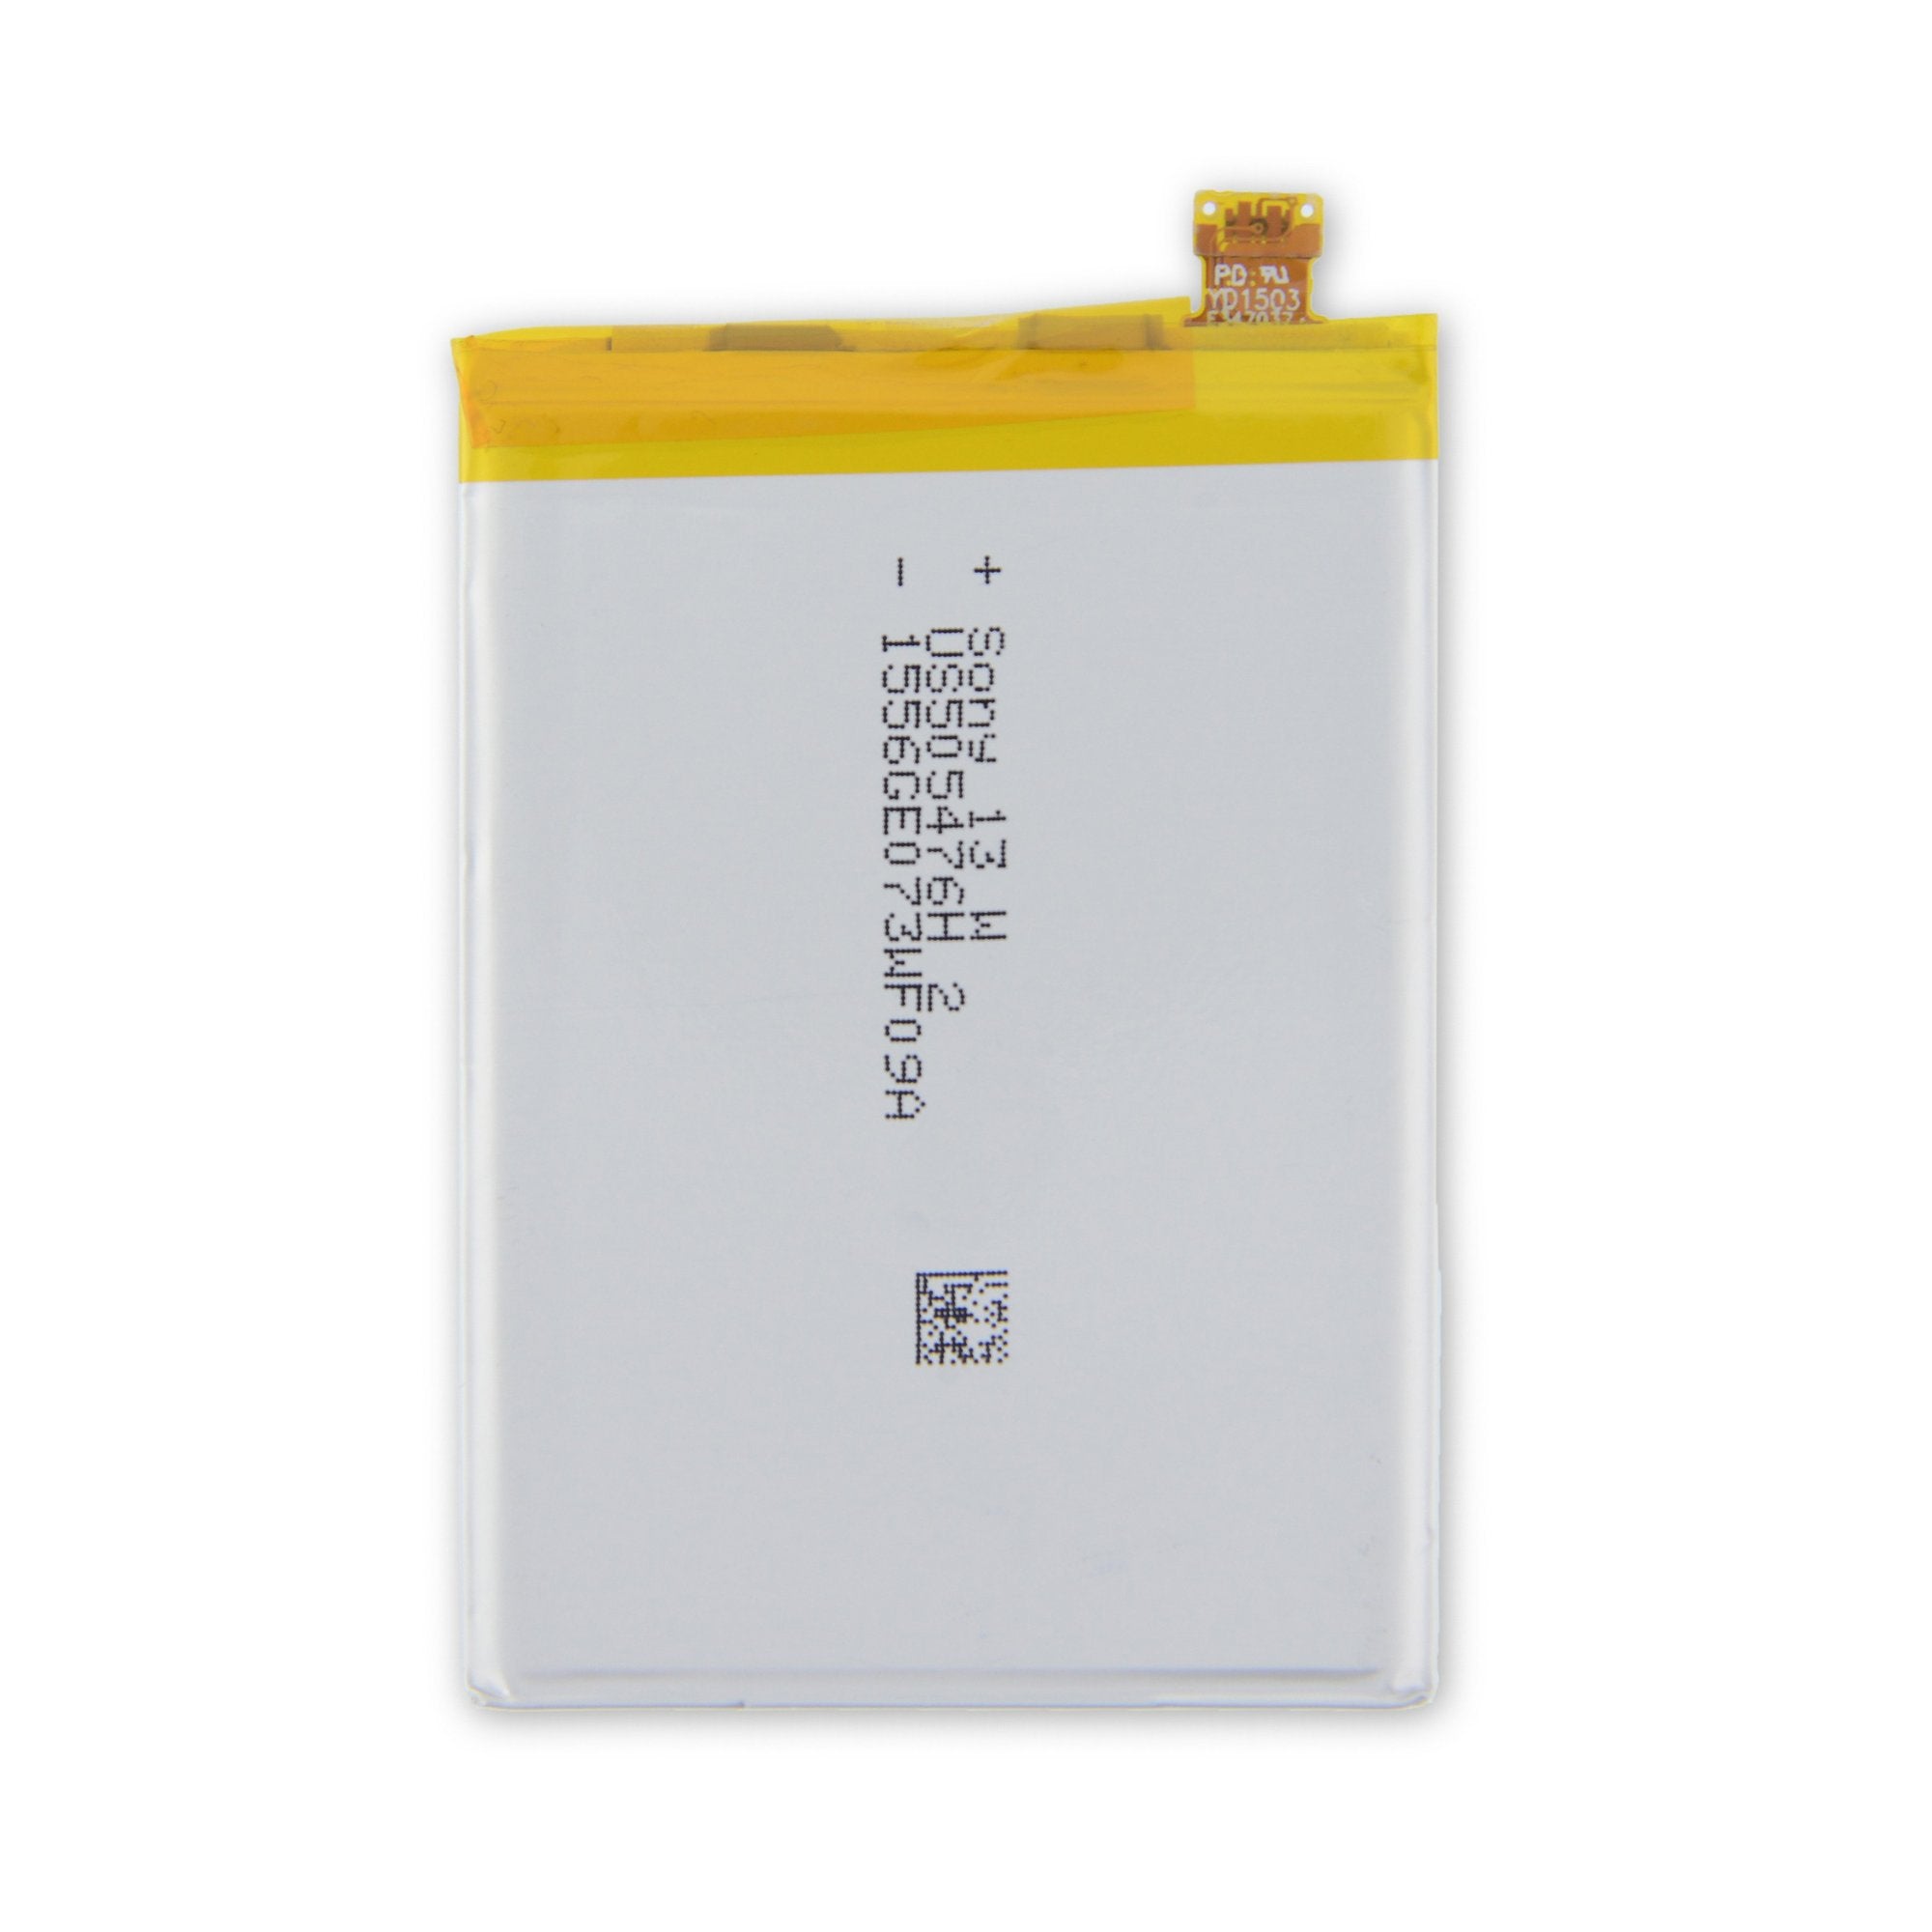 Asus Zenfone 2 Battery New Part Only